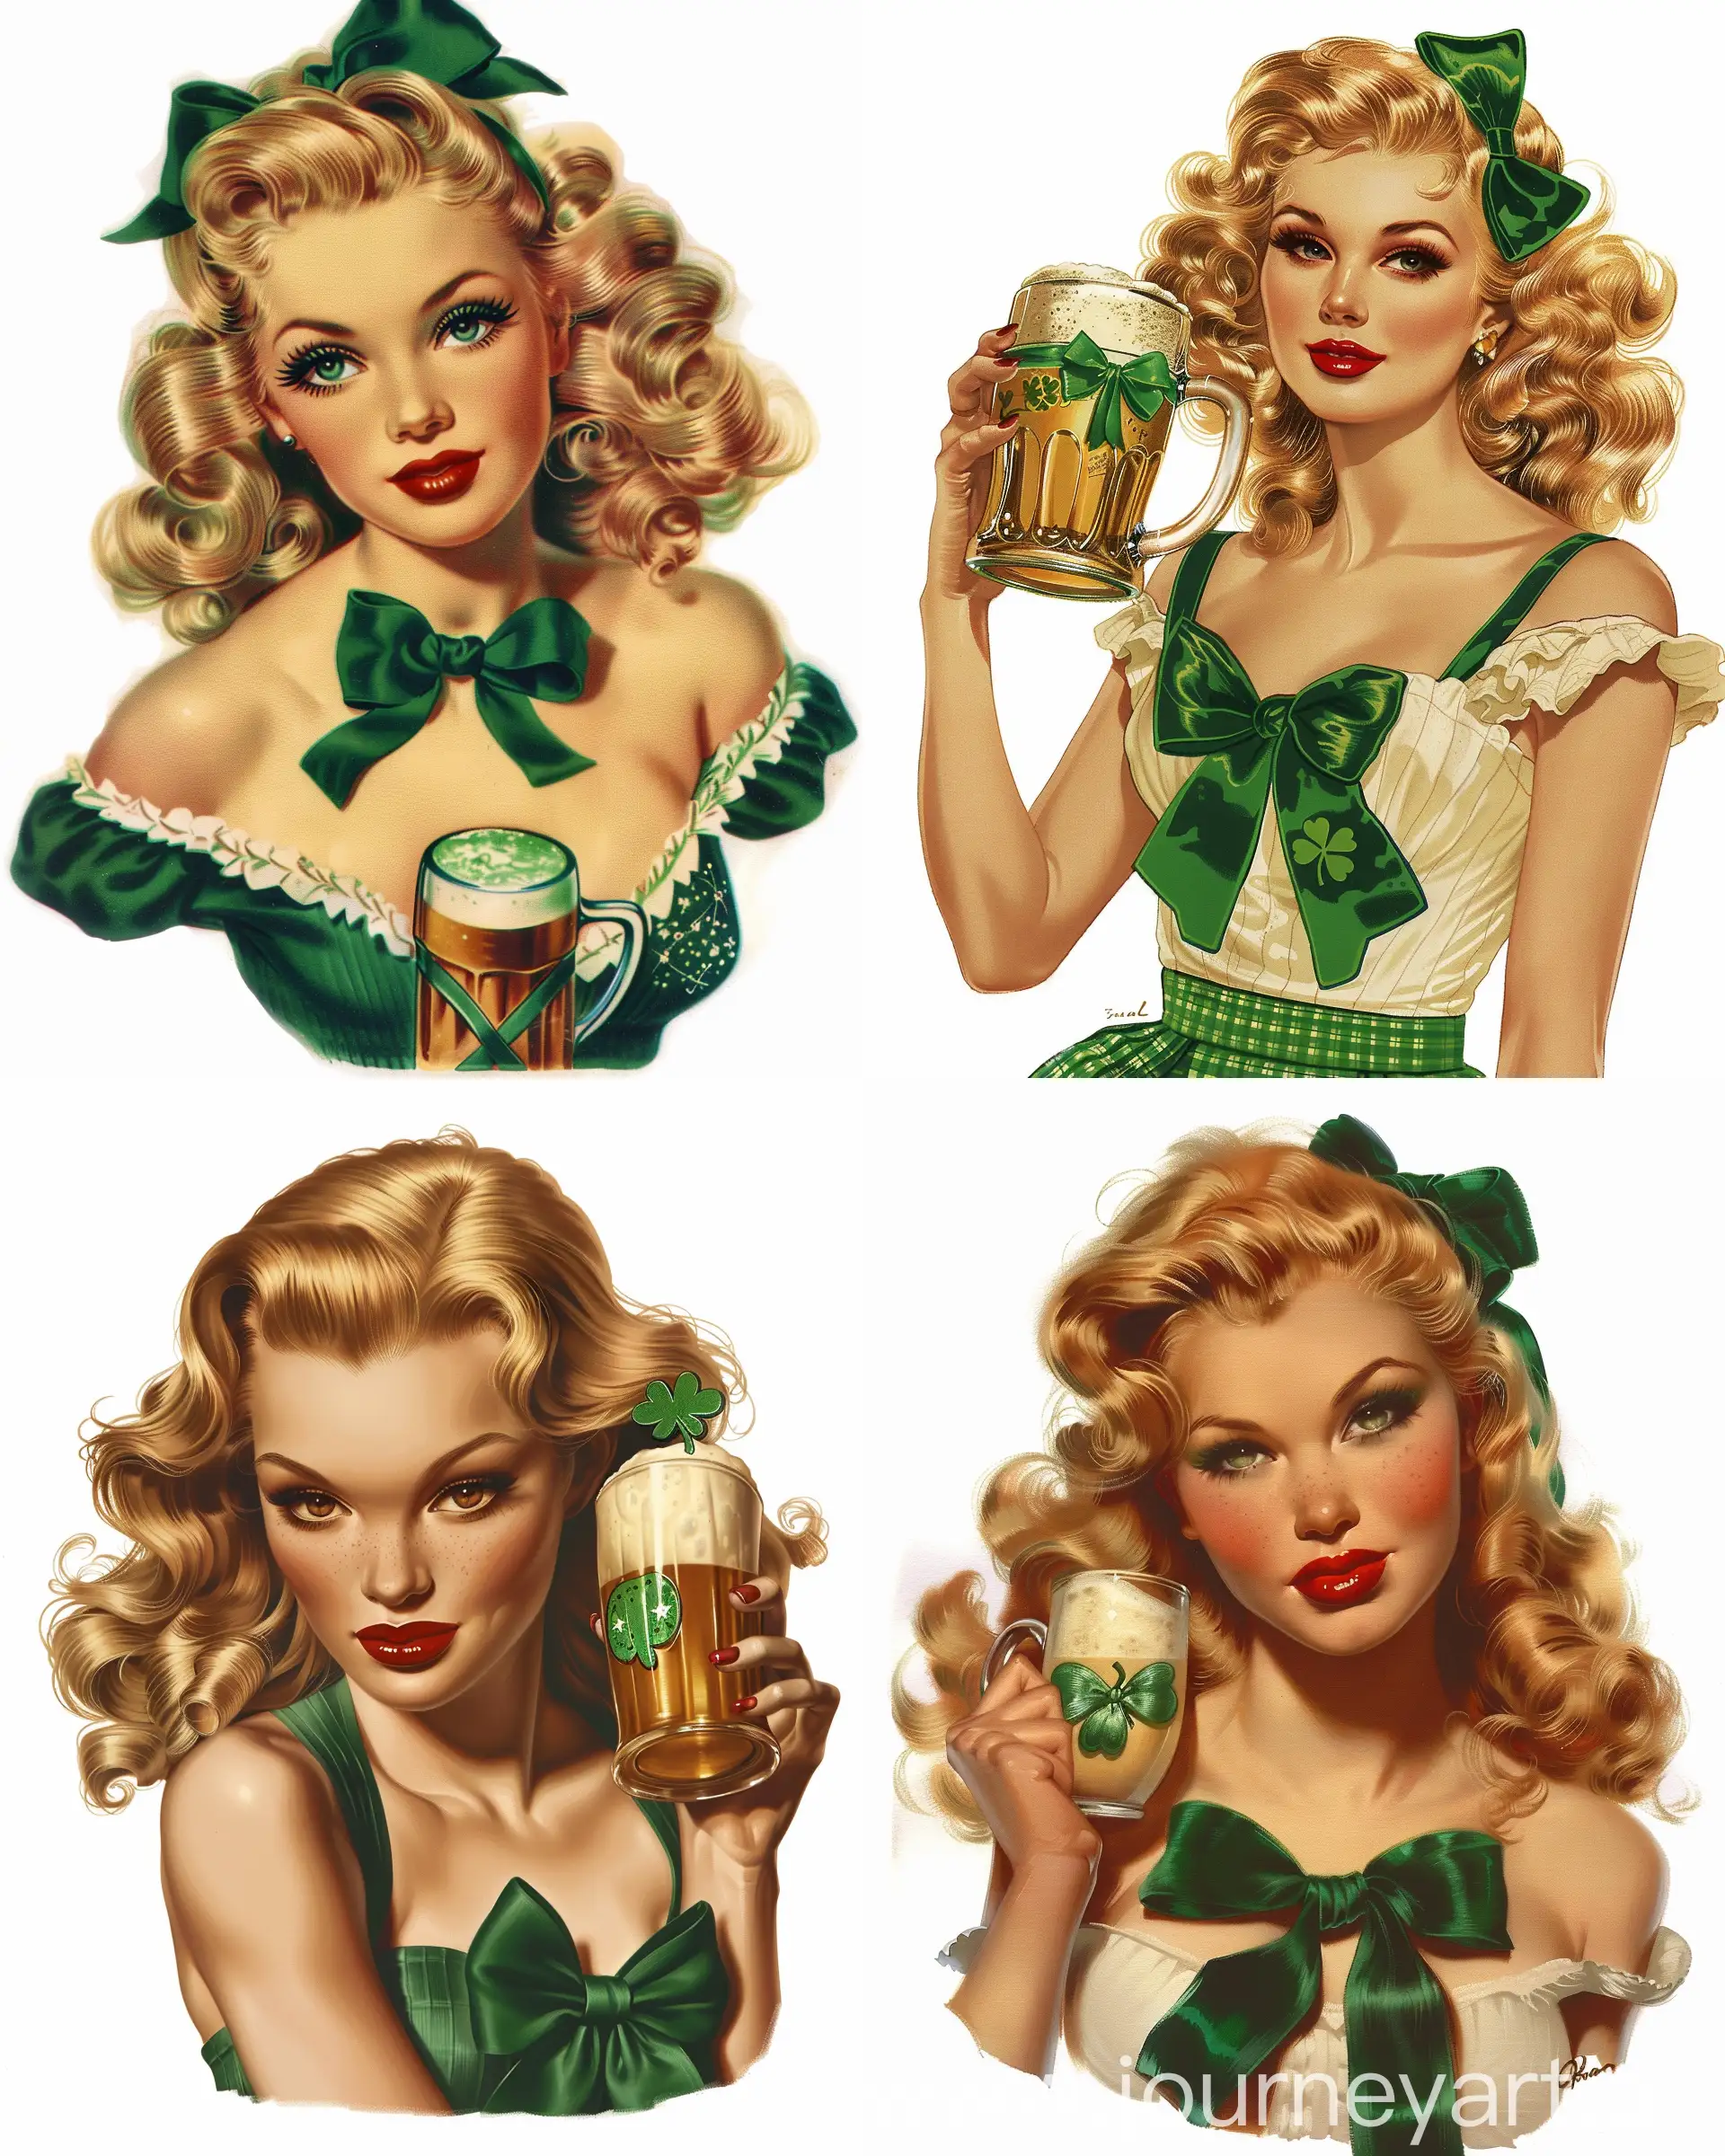 St-Patricks-Day-PinUp-Blonde-Beauty-with-Frothy-Beer-Mug